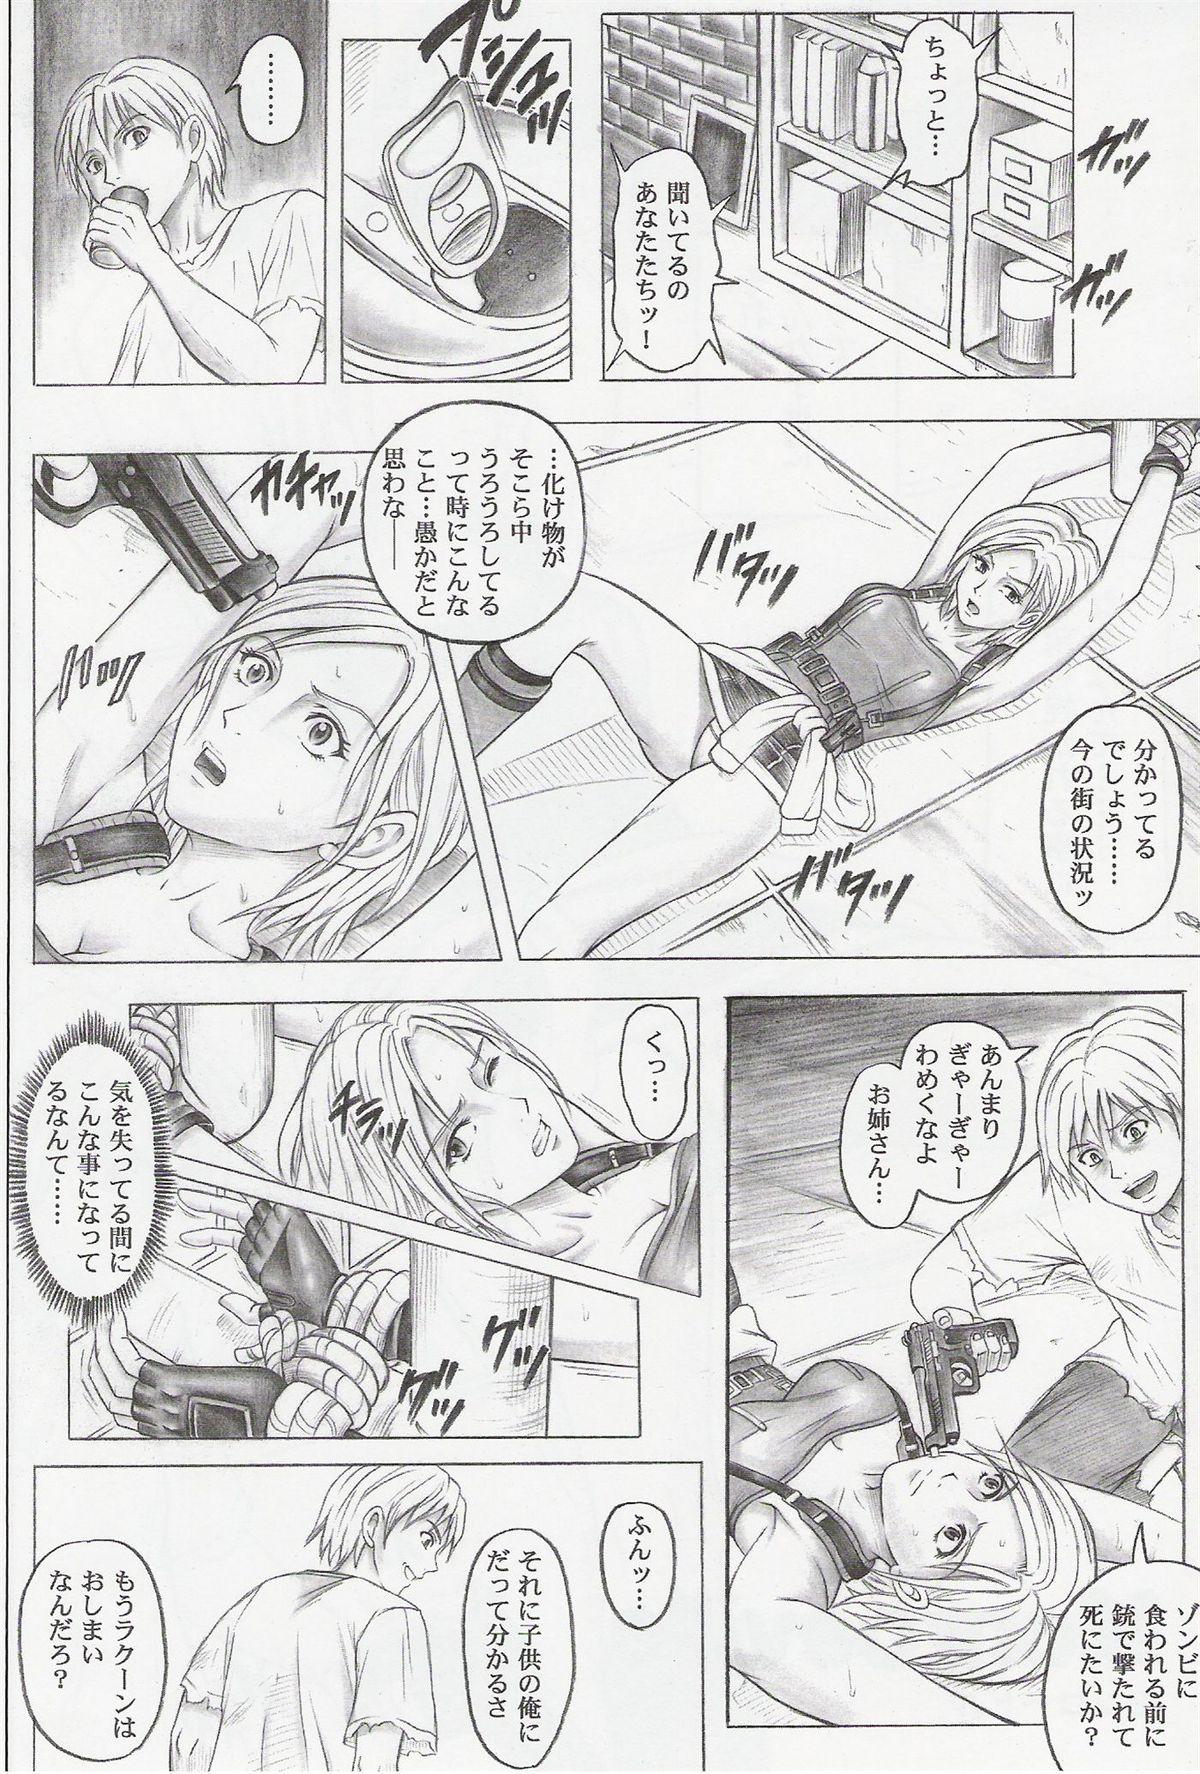 Lolicon Monroeville - Resident evil Hand - Page 7